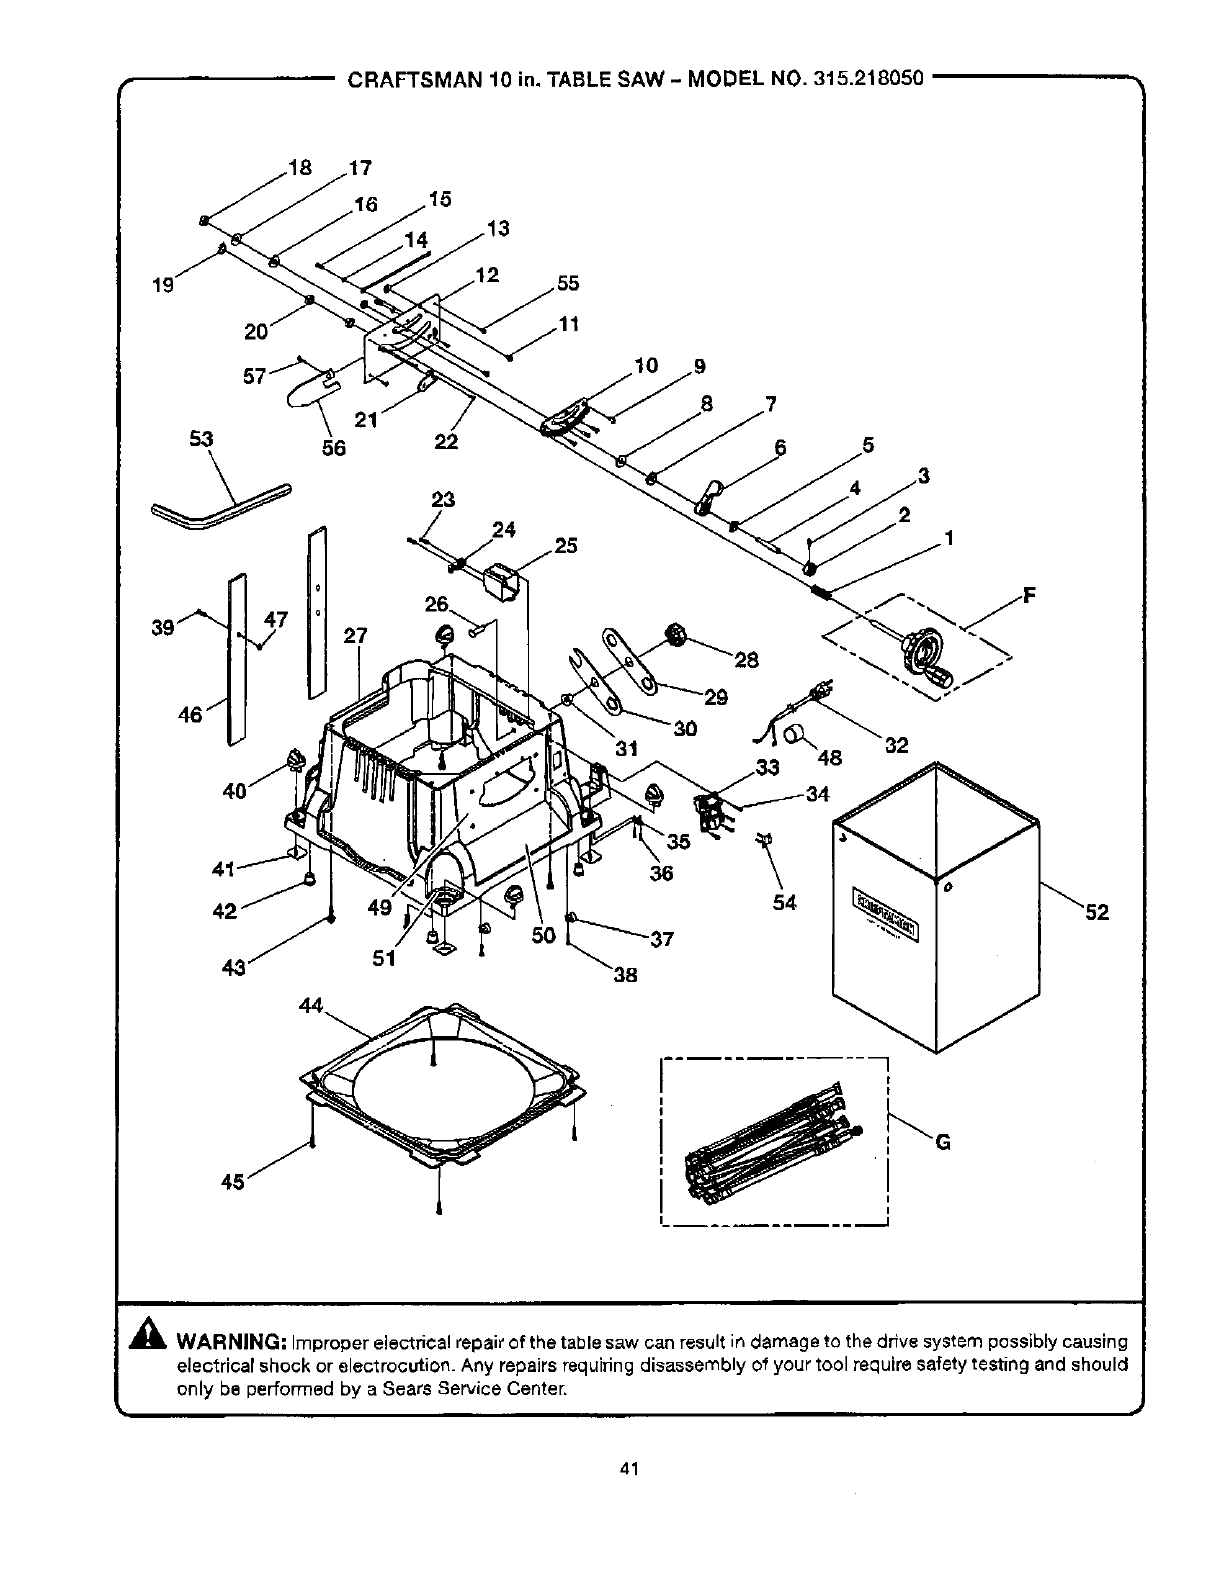 Craftsman 315218050 User Manual TABLE SAW Manuals And Guides L0521320  Switch Wiring Diagram For Craftsman 10 In Table Saw 315.218050    UserManual.wiki